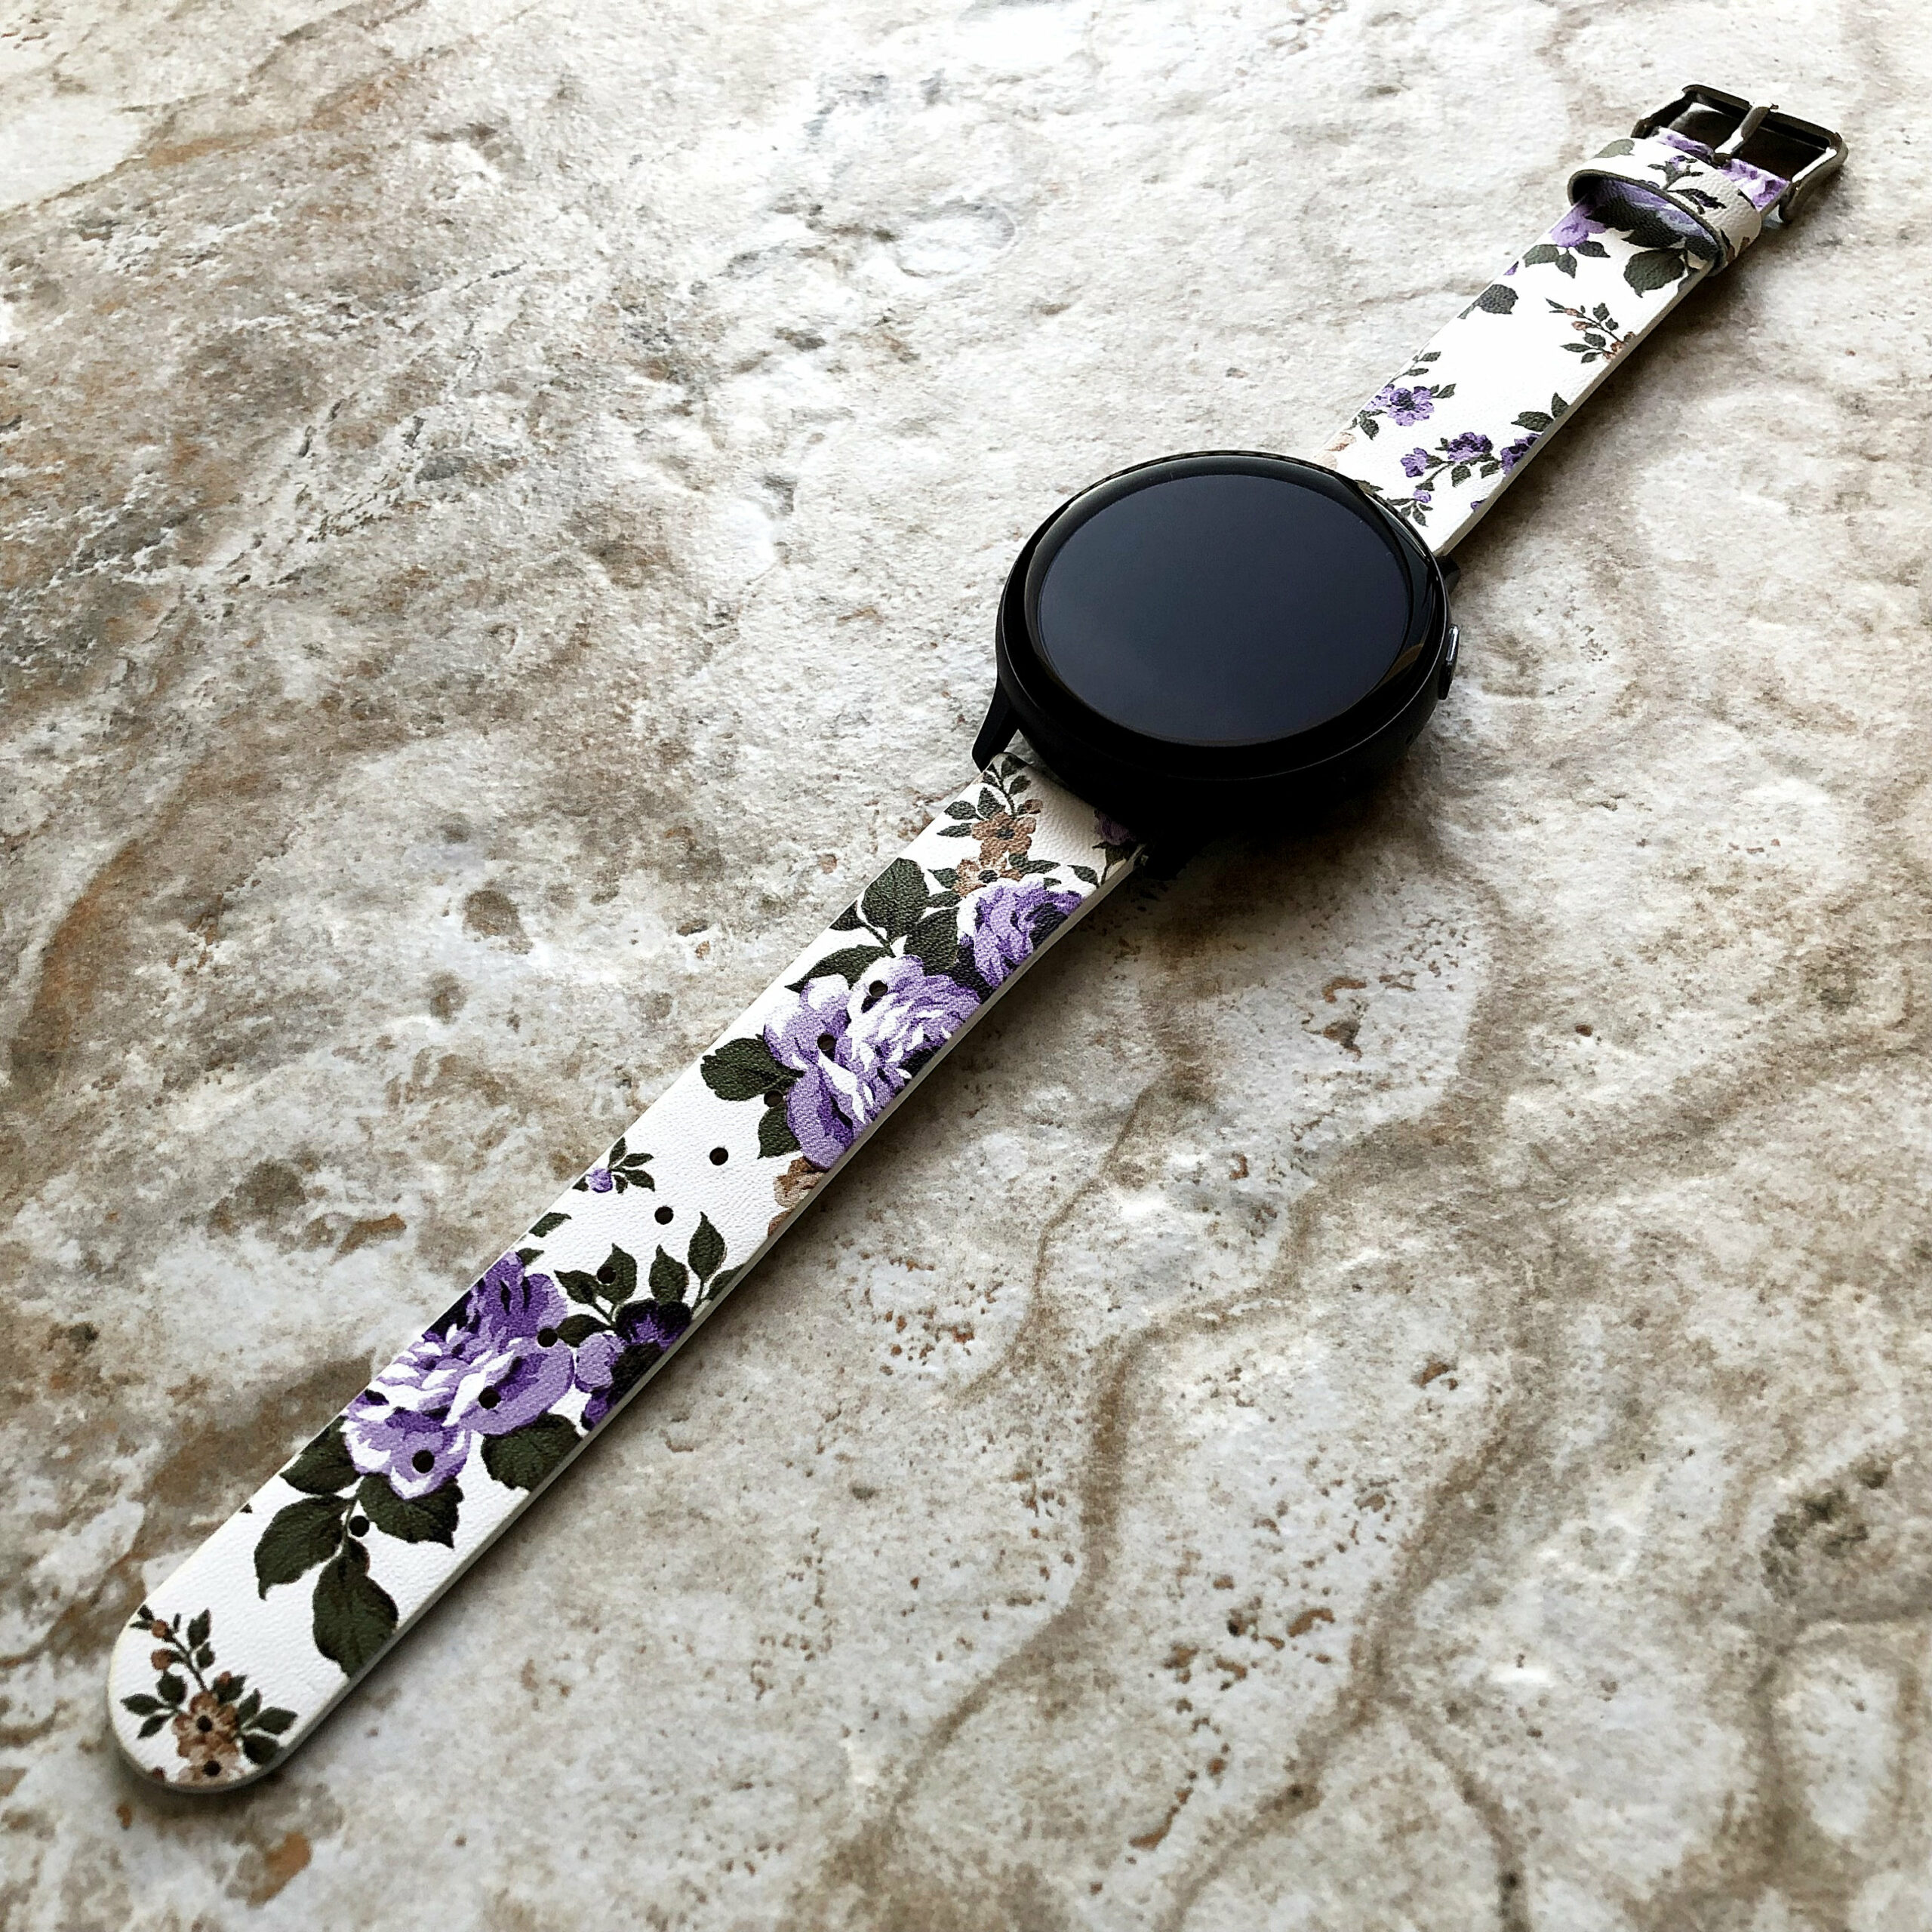 fl 4 band for samsung galaxy watch active 2 40mm 42mm 44mm soft purple floral bracelet cuff leather wristband strap with quick release pins 5ddedd7c scaled